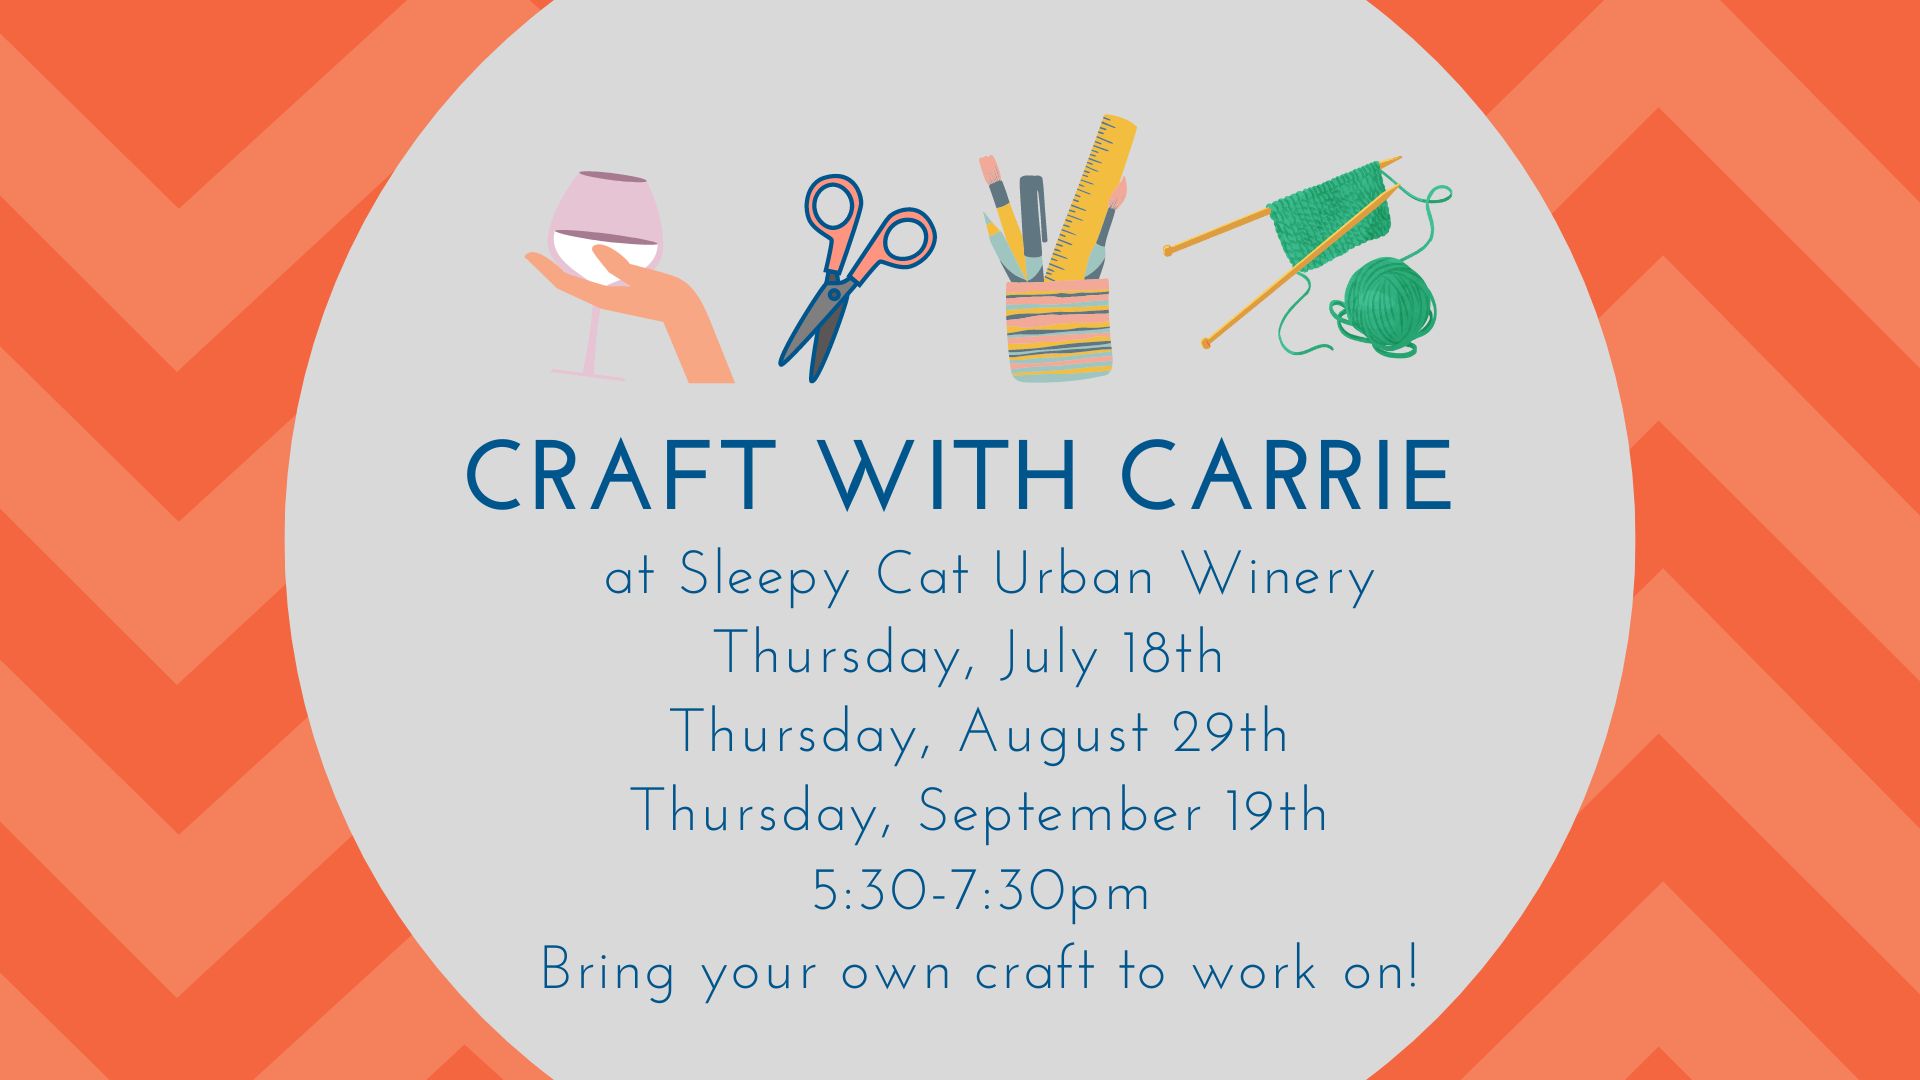 Craft with Carrie